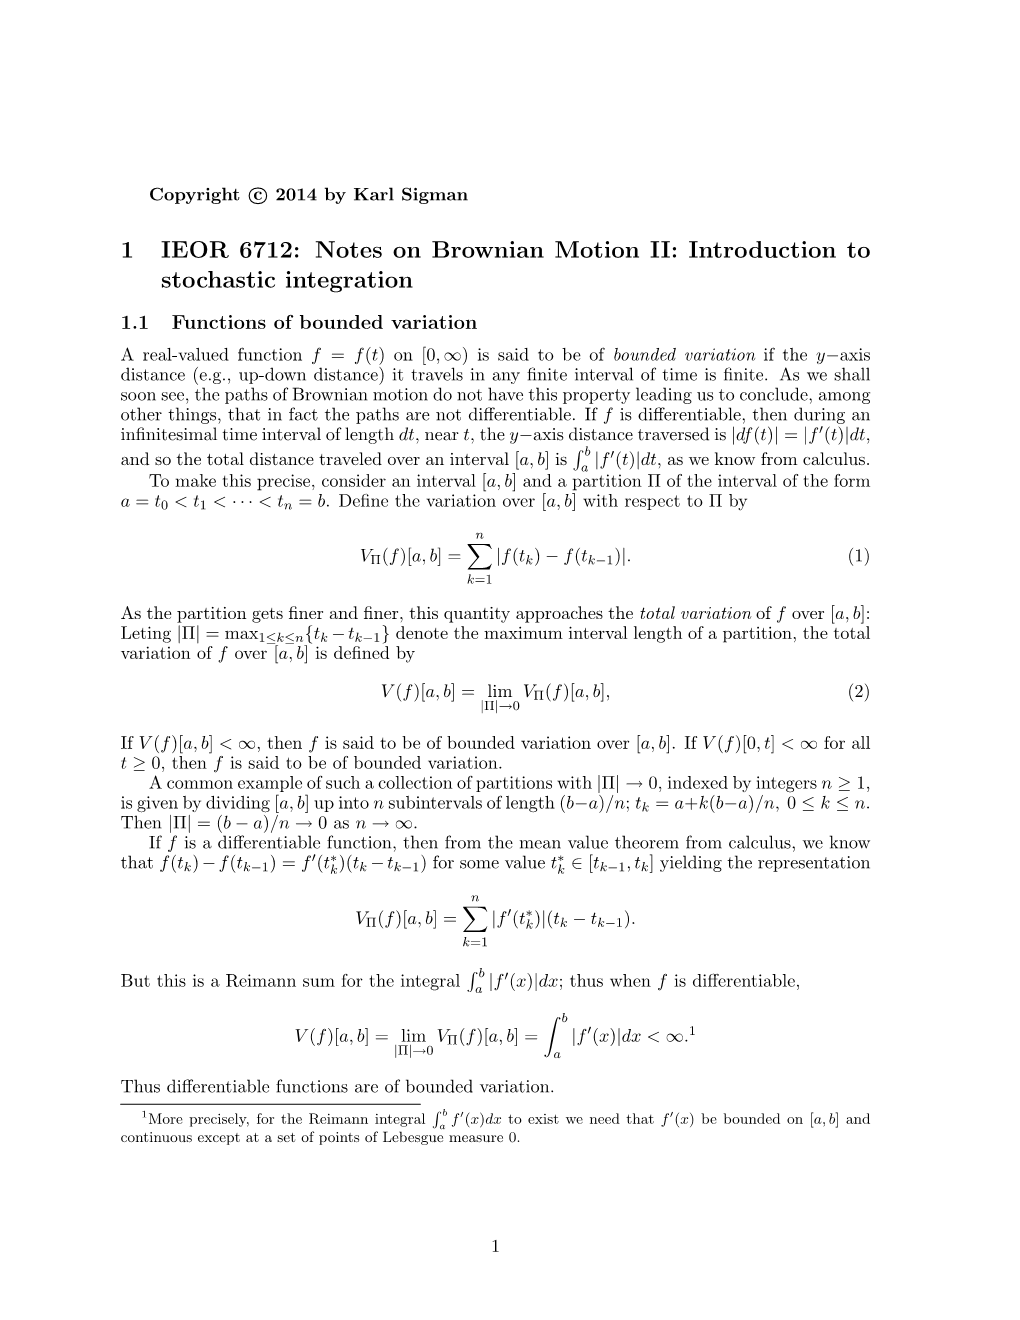 Notes on Brownian Motion II: Introduction to Stochastic Integration